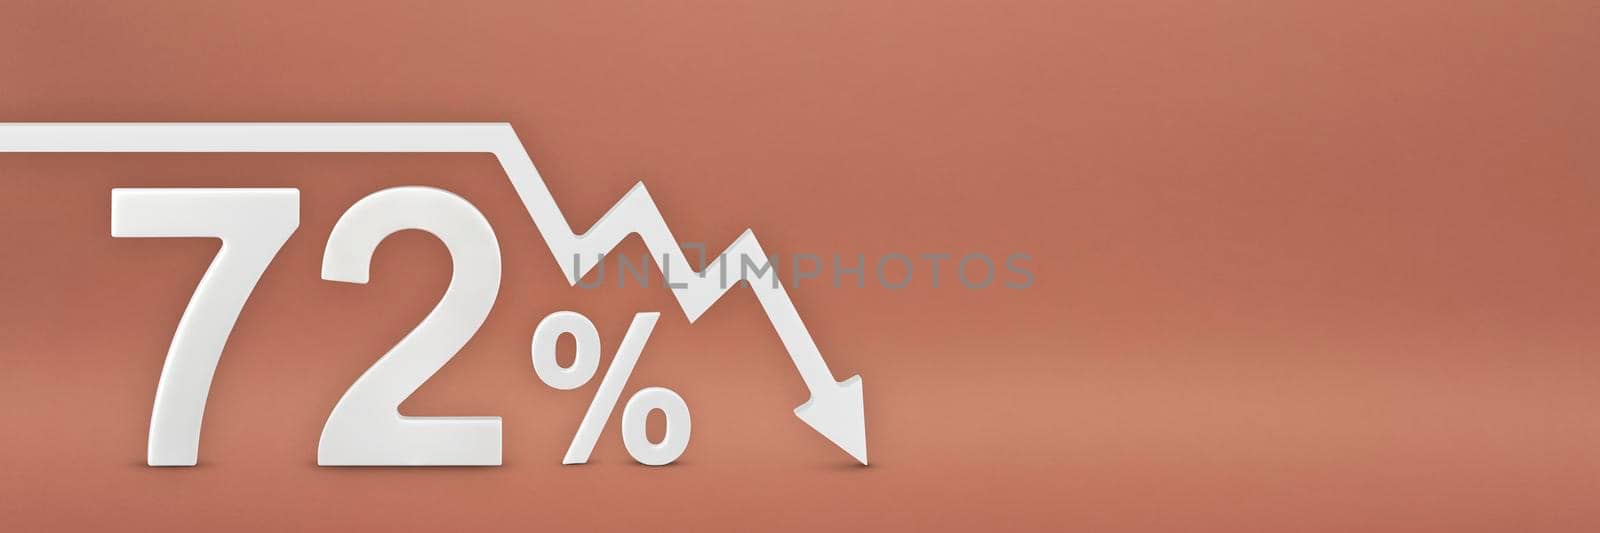 seventy-two percent, the arrow on the graph is pointing down. Stock market crash, bear market, inflation.Economic collapse, collapse of stocks.3d banner,72 percent discount sign on a red background